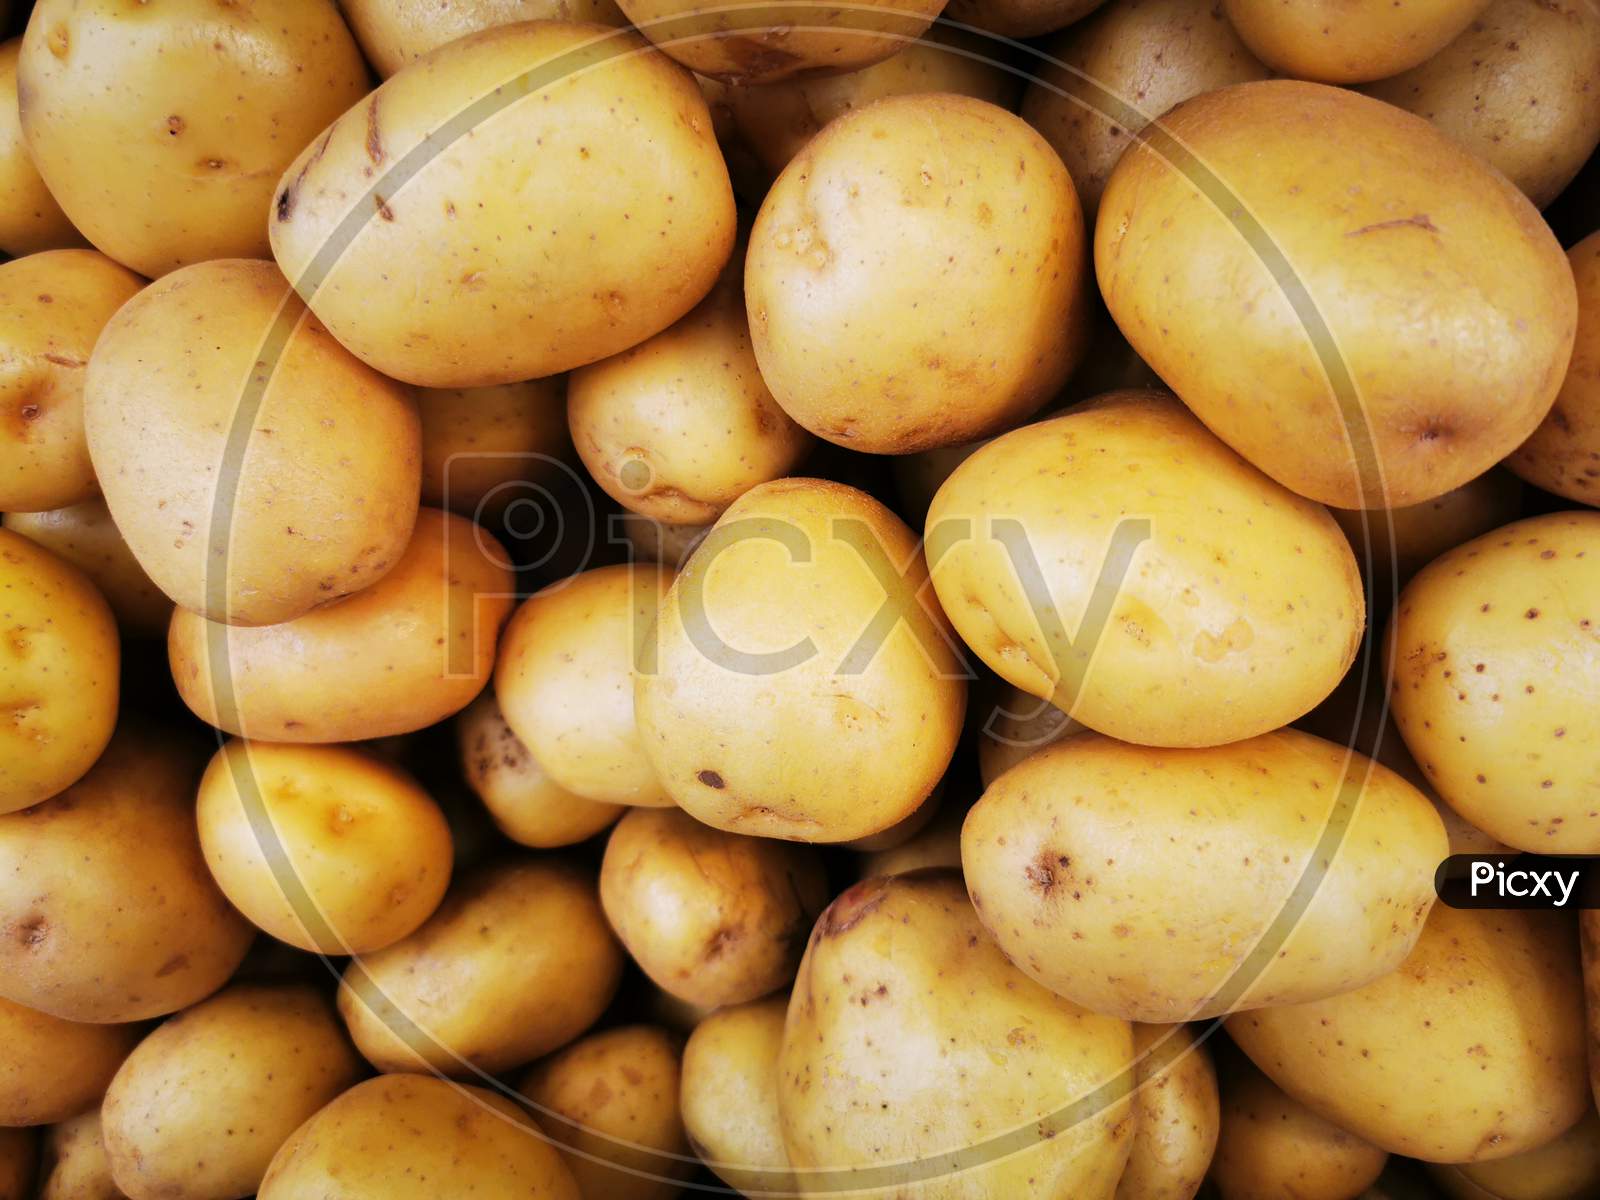 The potato is a root vegetable native to the Americas, a starchy tuber of the plant Solanum tuberosum, and the plant itself is a perennial in the nightshade family, Solanaceae. Wild potato species, originating in modern-day Peru, can be found throughout the Americas, from the United States to southe